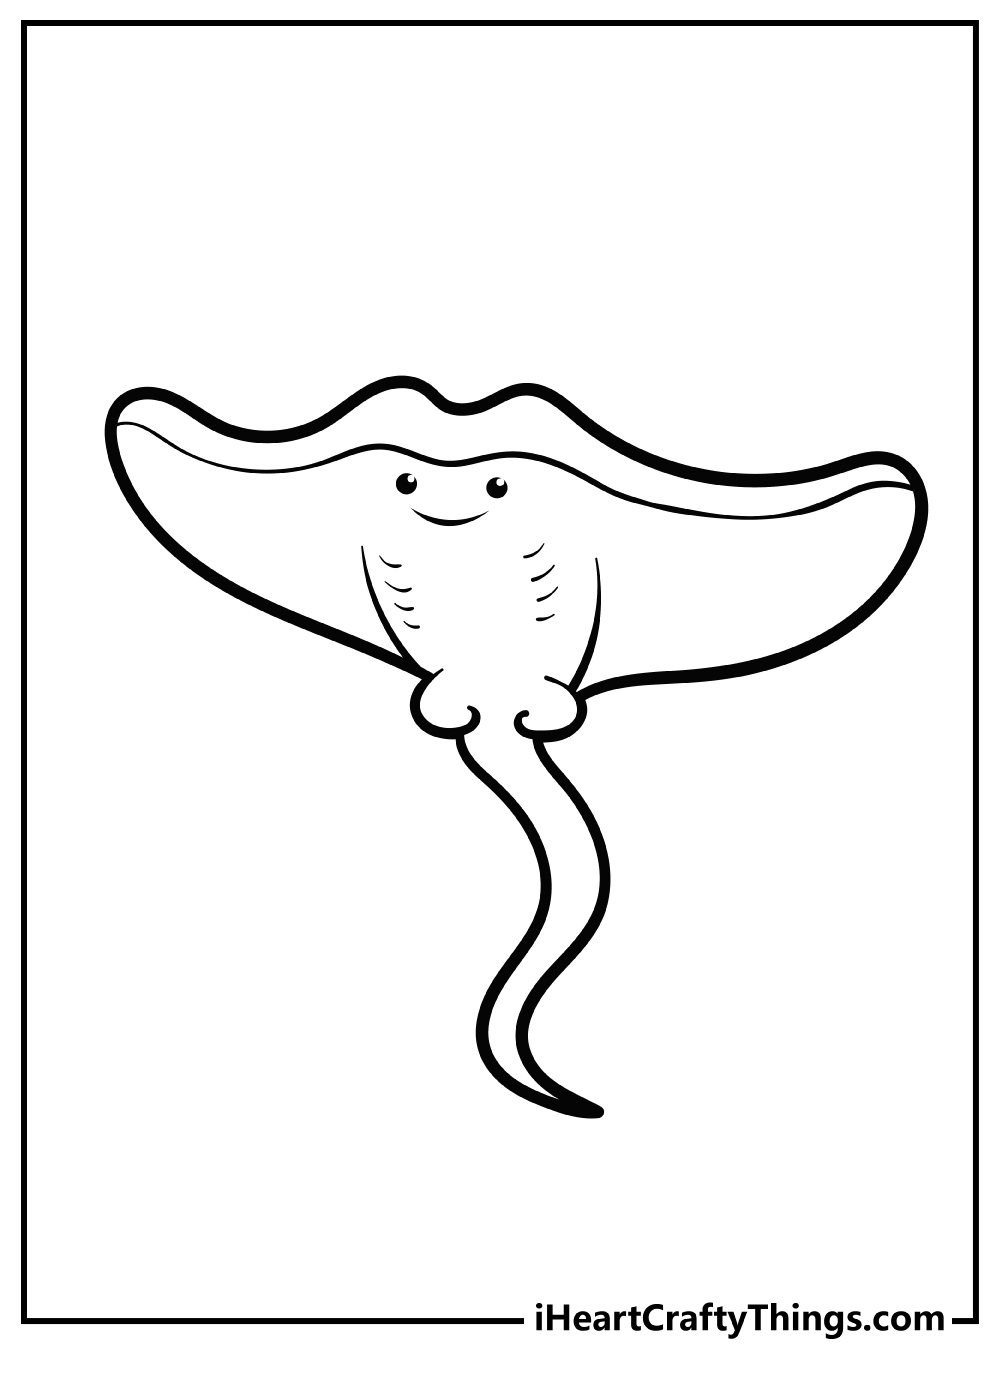 Sea Creature Easy Coloring Pages